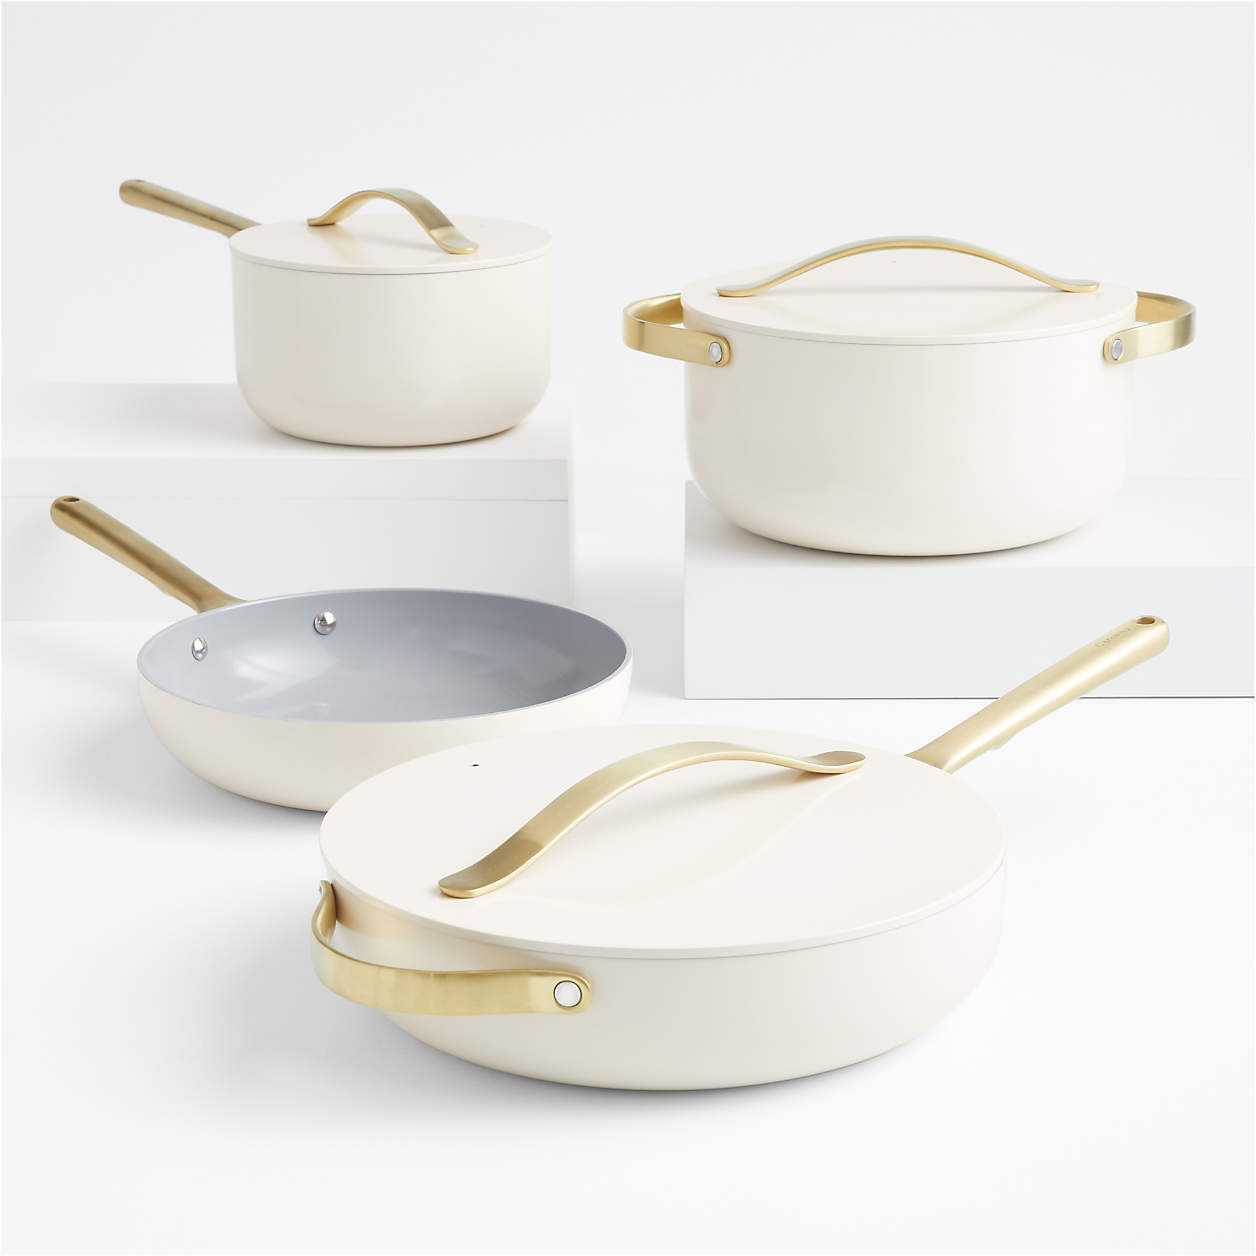 Caraway Debuts Black and White Cookware